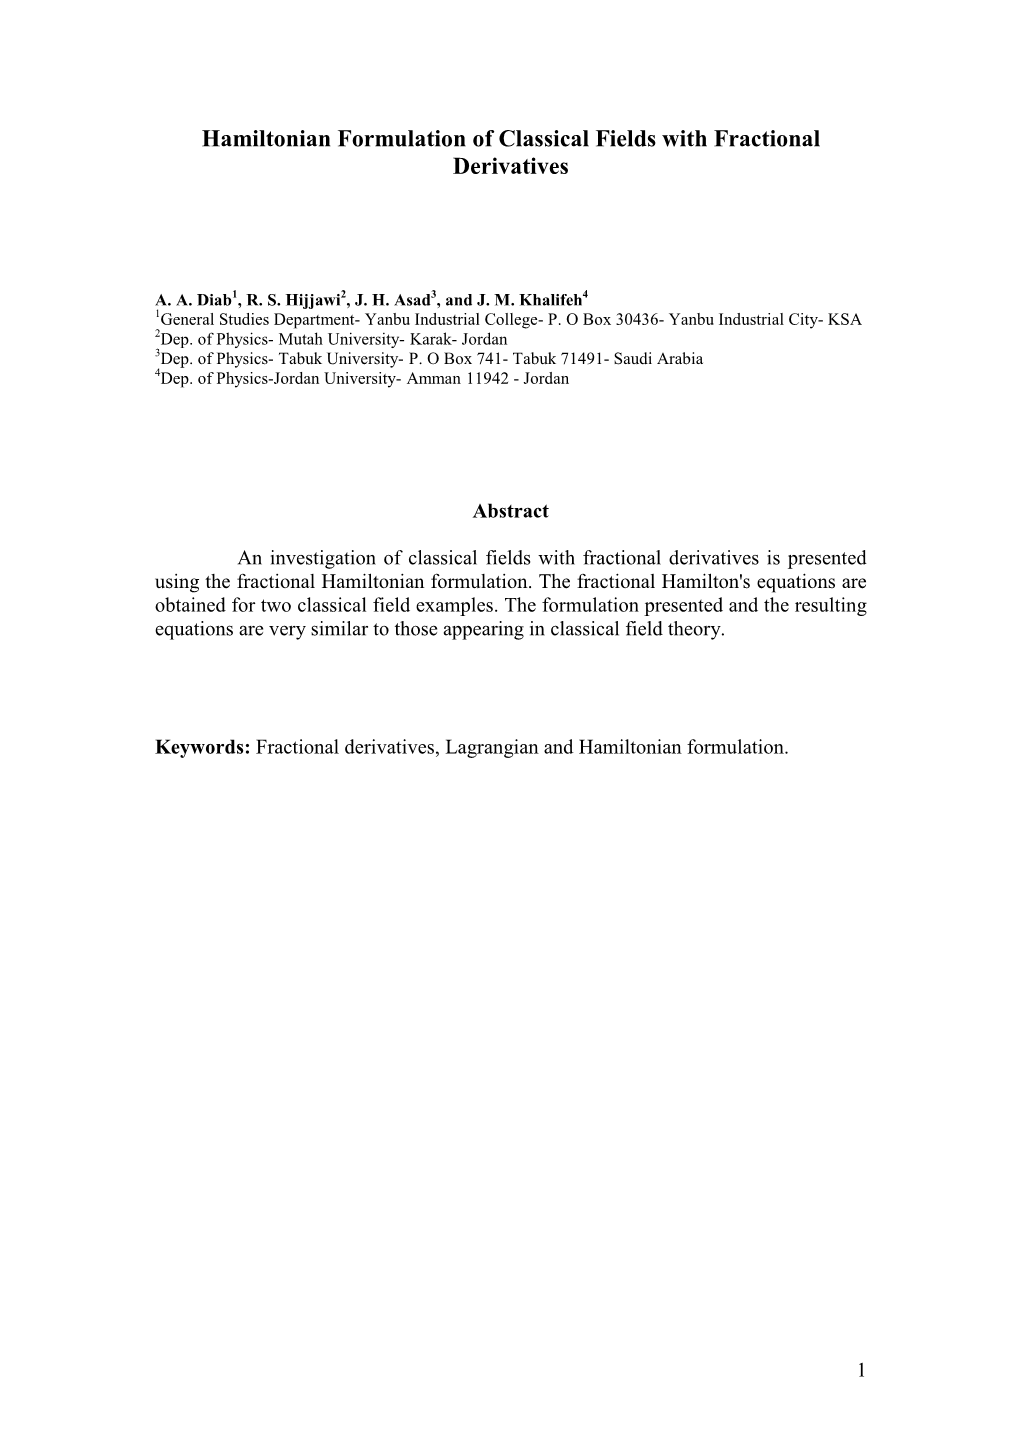 Hamiltonian Formulation of Classical Fields with Fractional Derivatives